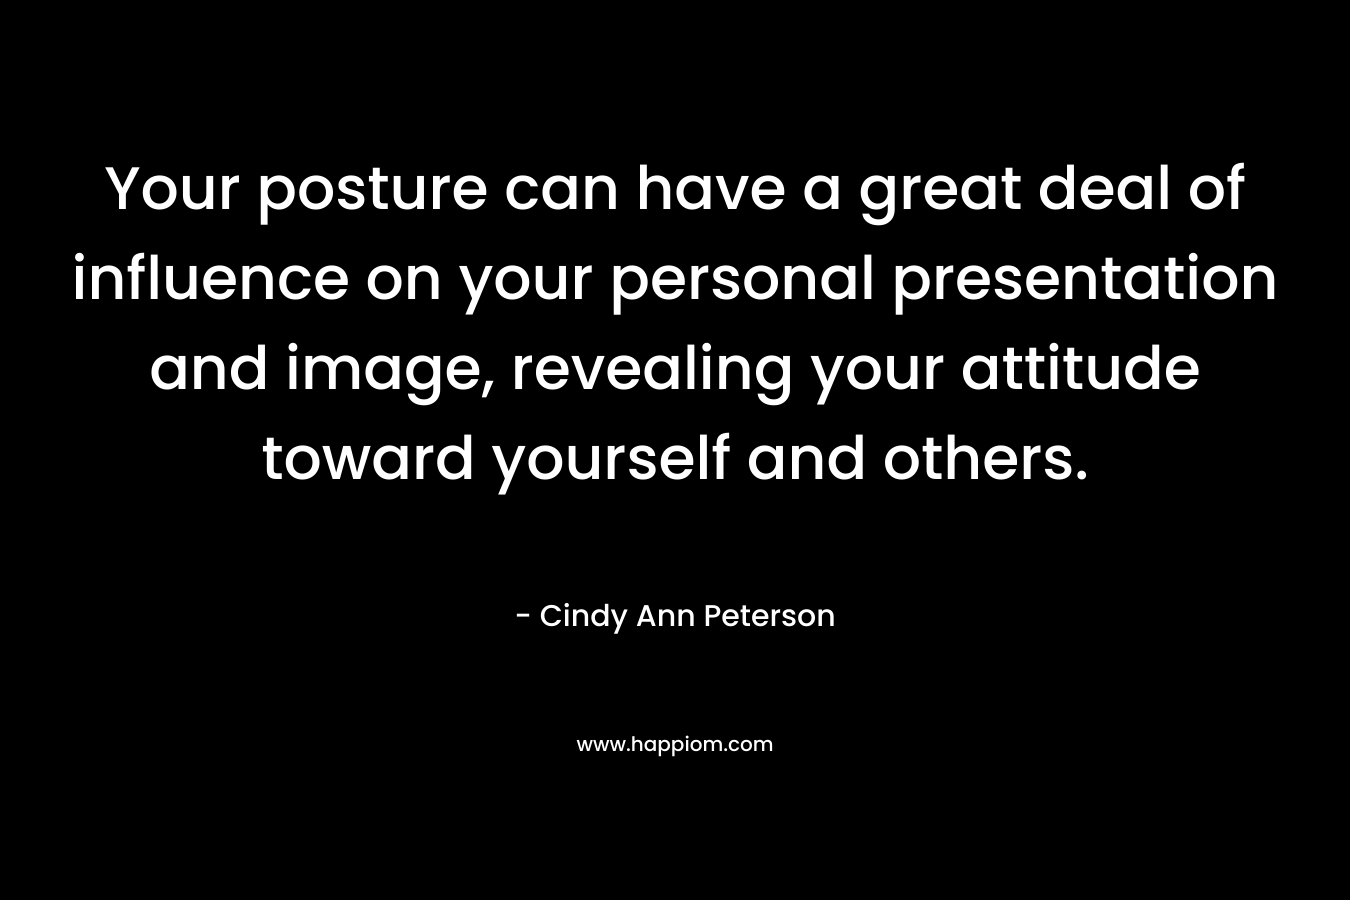 Your posture can have a great deal of influence on your personal presentation and image, revealing your attitude toward yourself and others. – Cindy Ann Peterson